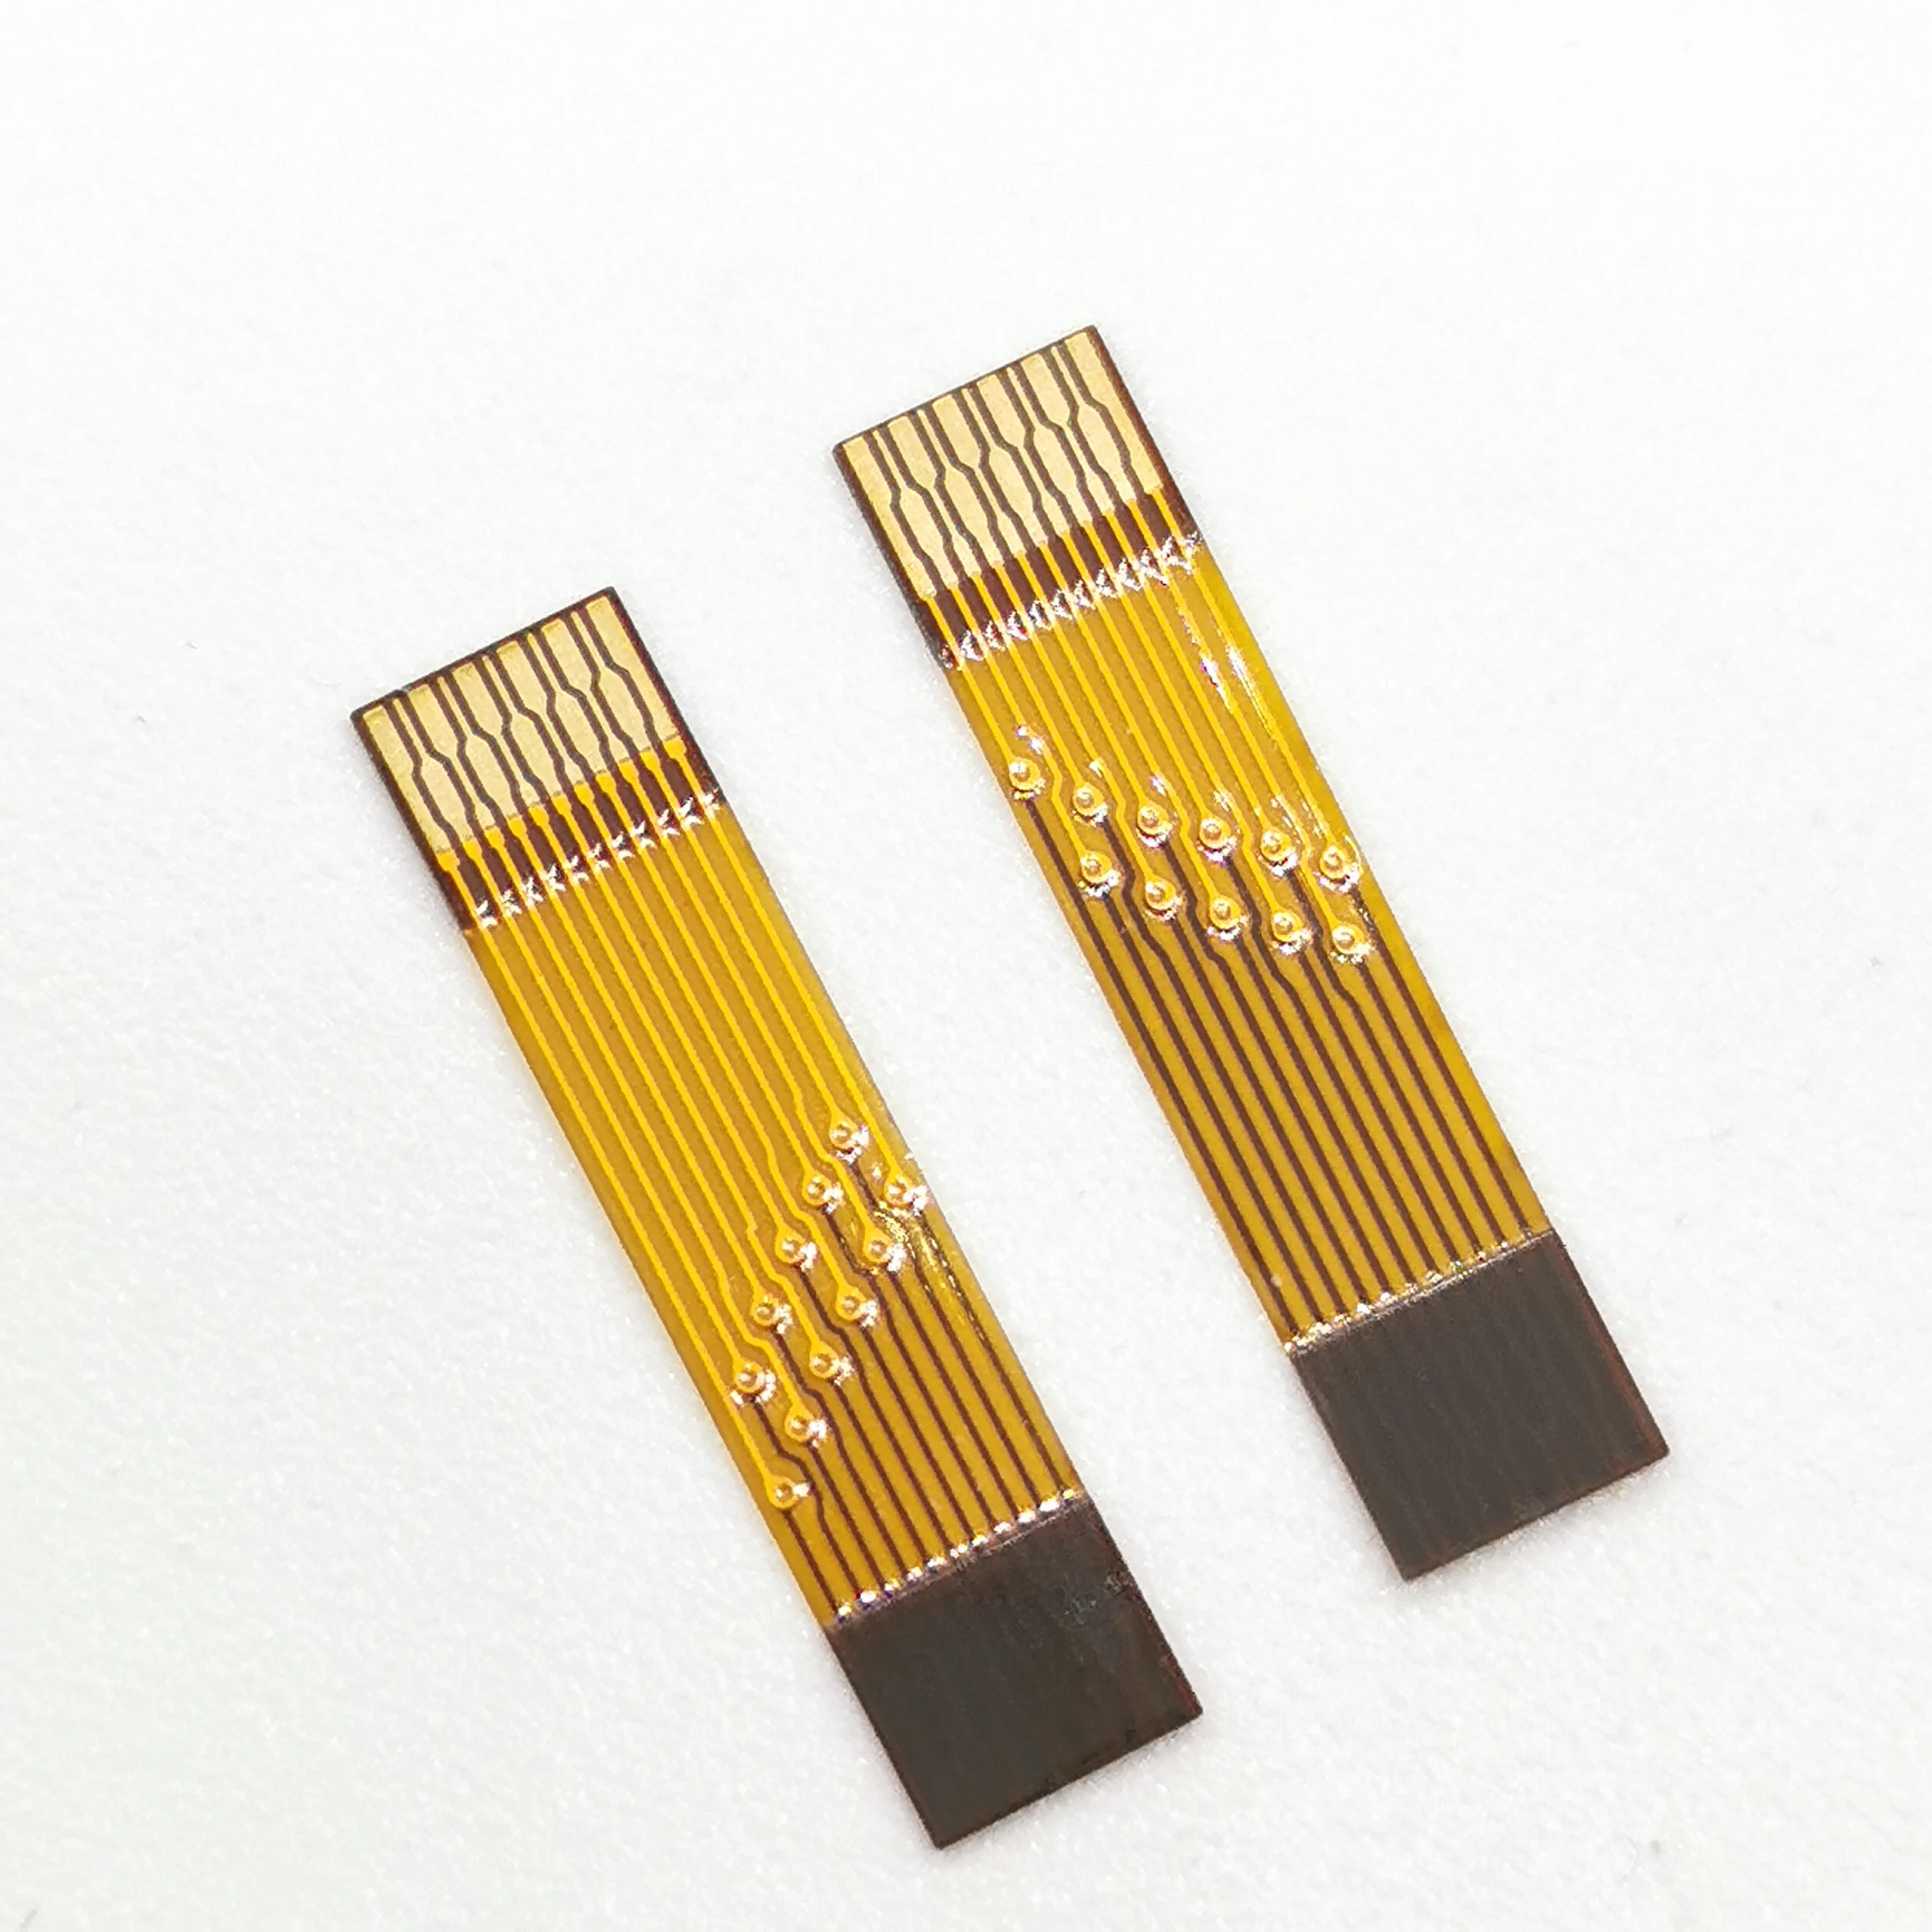 FPC Flexible Flat Cable FPC Ribbon Cable